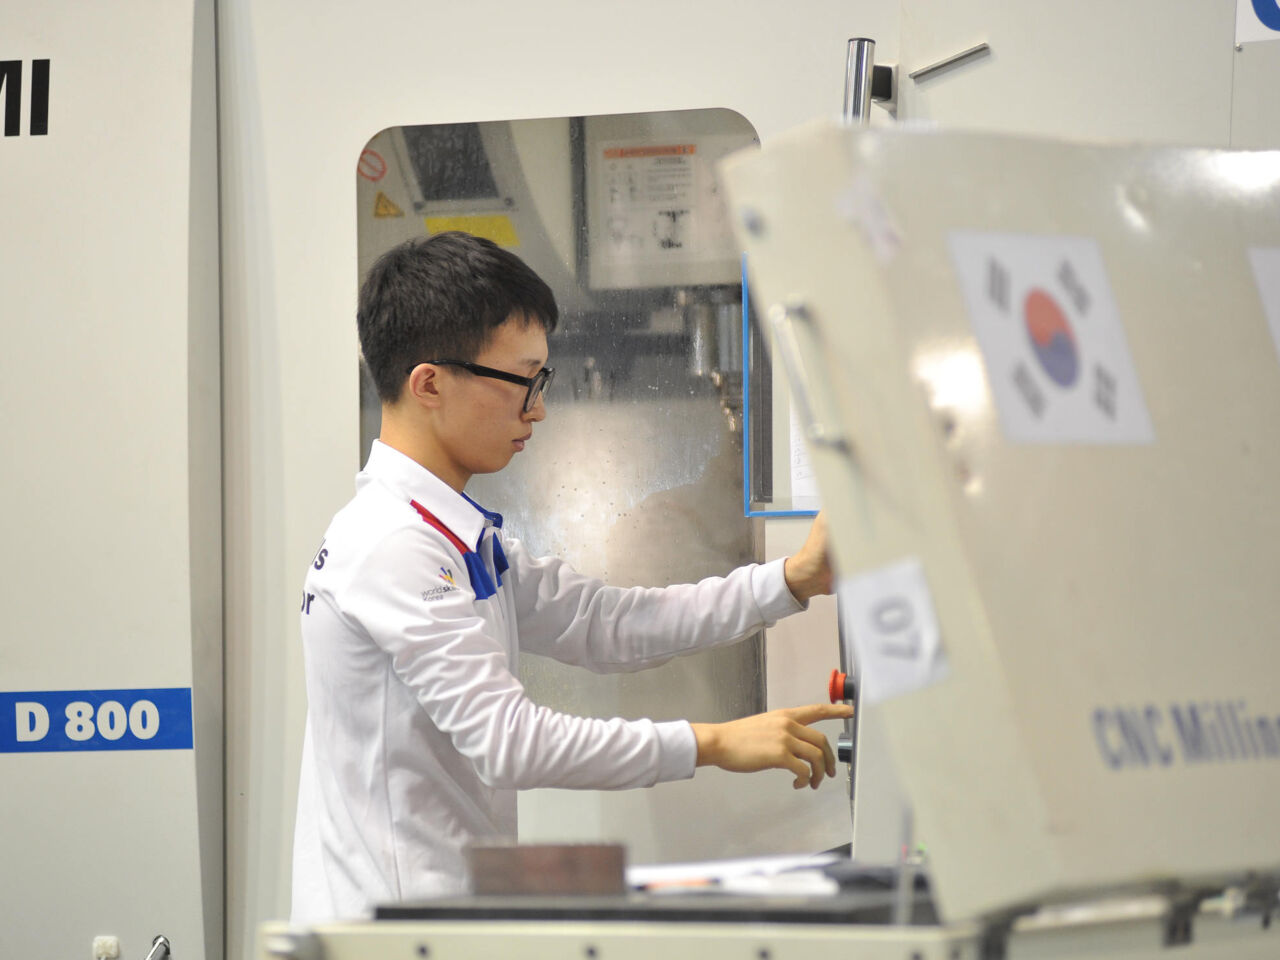 Lee Hee Dong competing in CNC Milling at WorldSkills São Paulo 2015.
